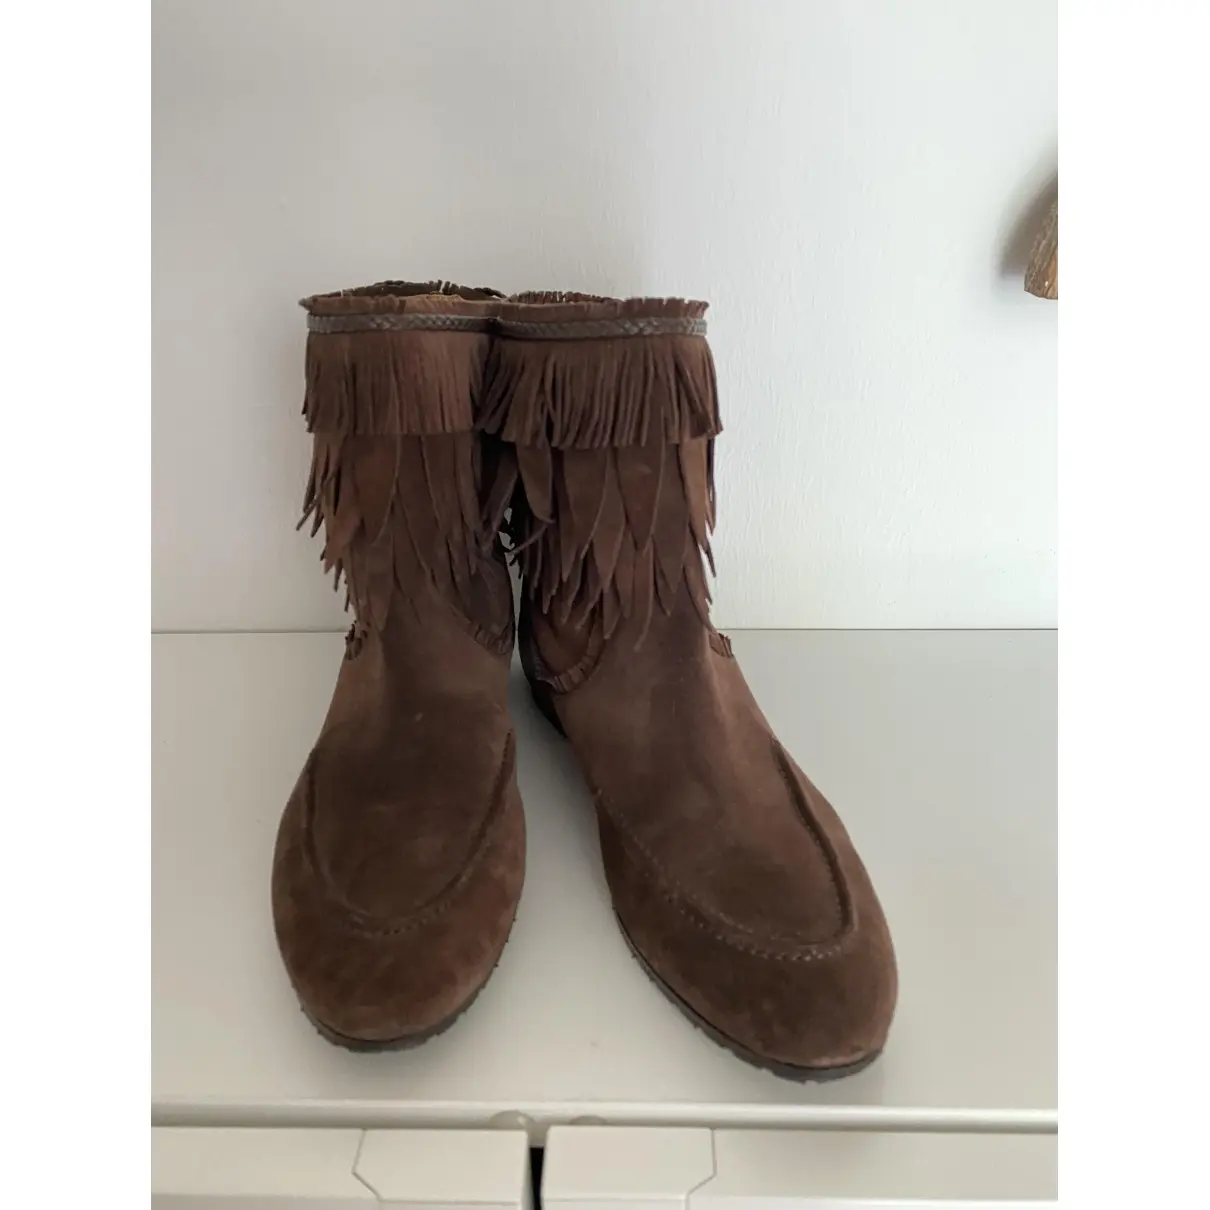 Aquazzura Ankle boots for sale